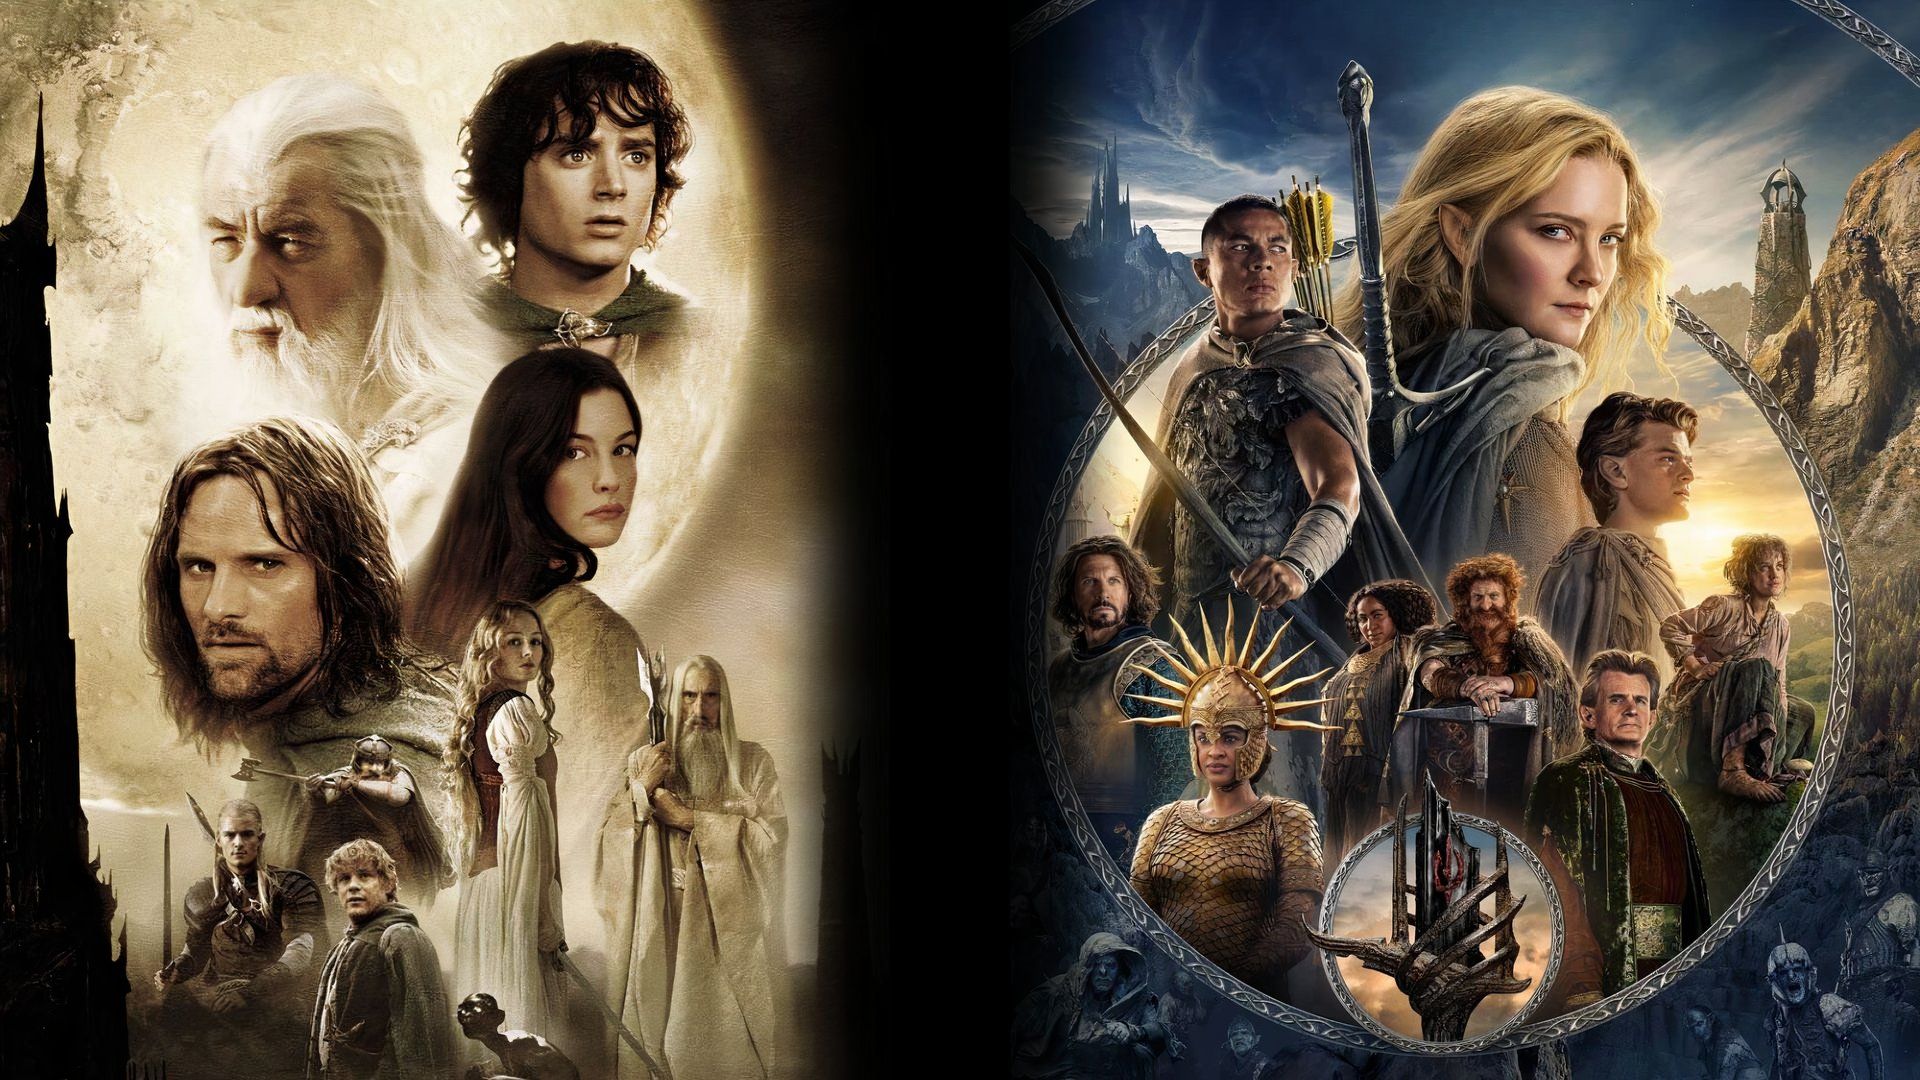 An edited image of The Lord of the Rings franchise with the Peter Jackson movies and Rings of Power series